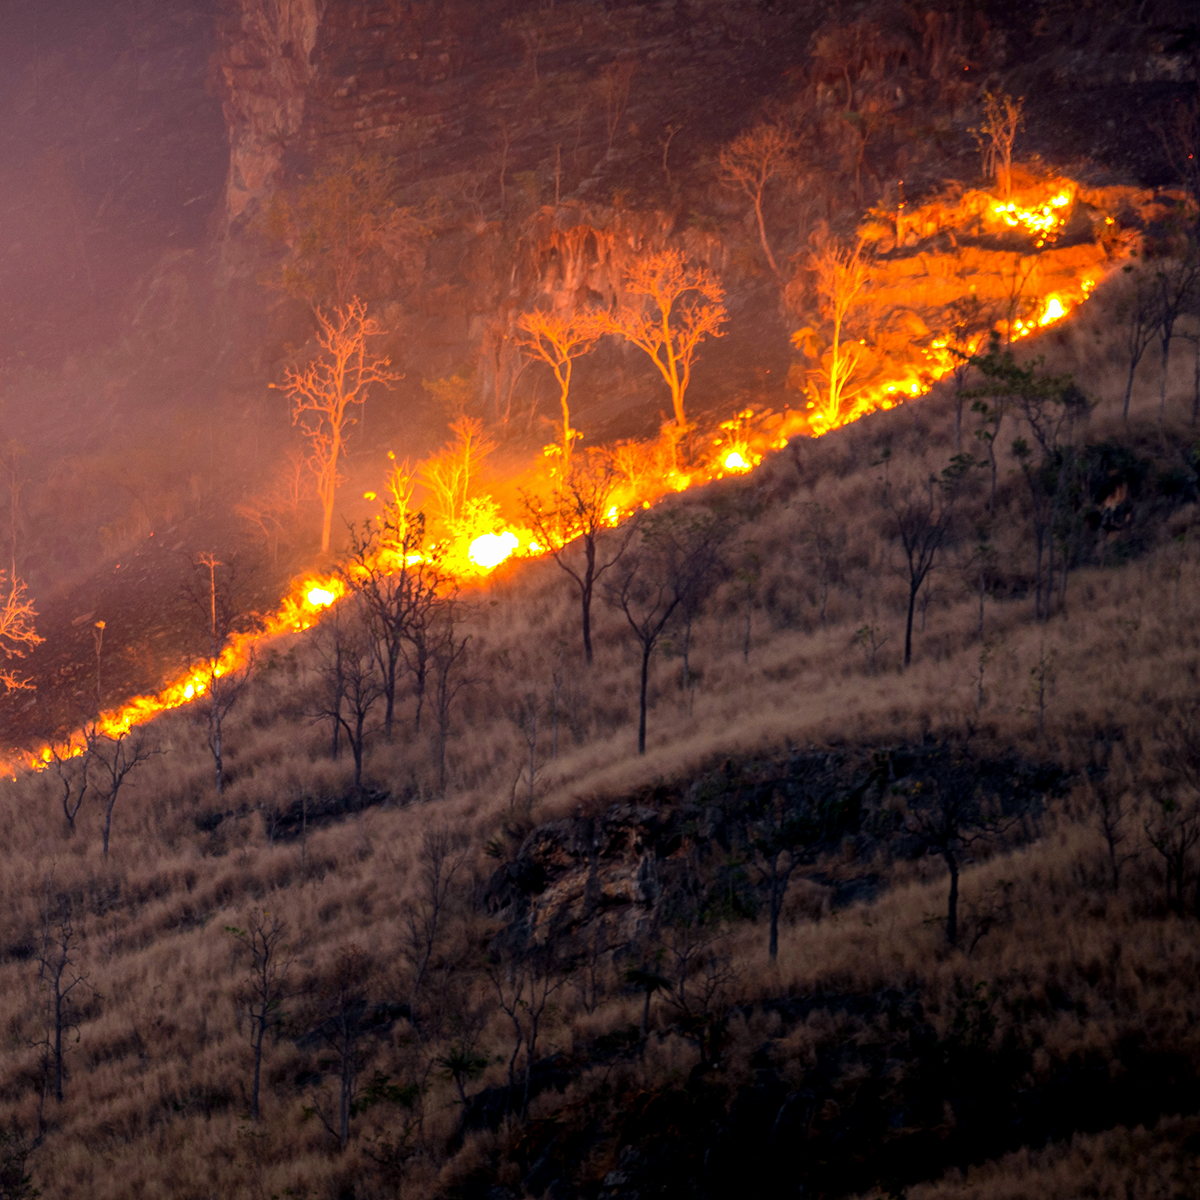 Fire rages along a dry mountainside.